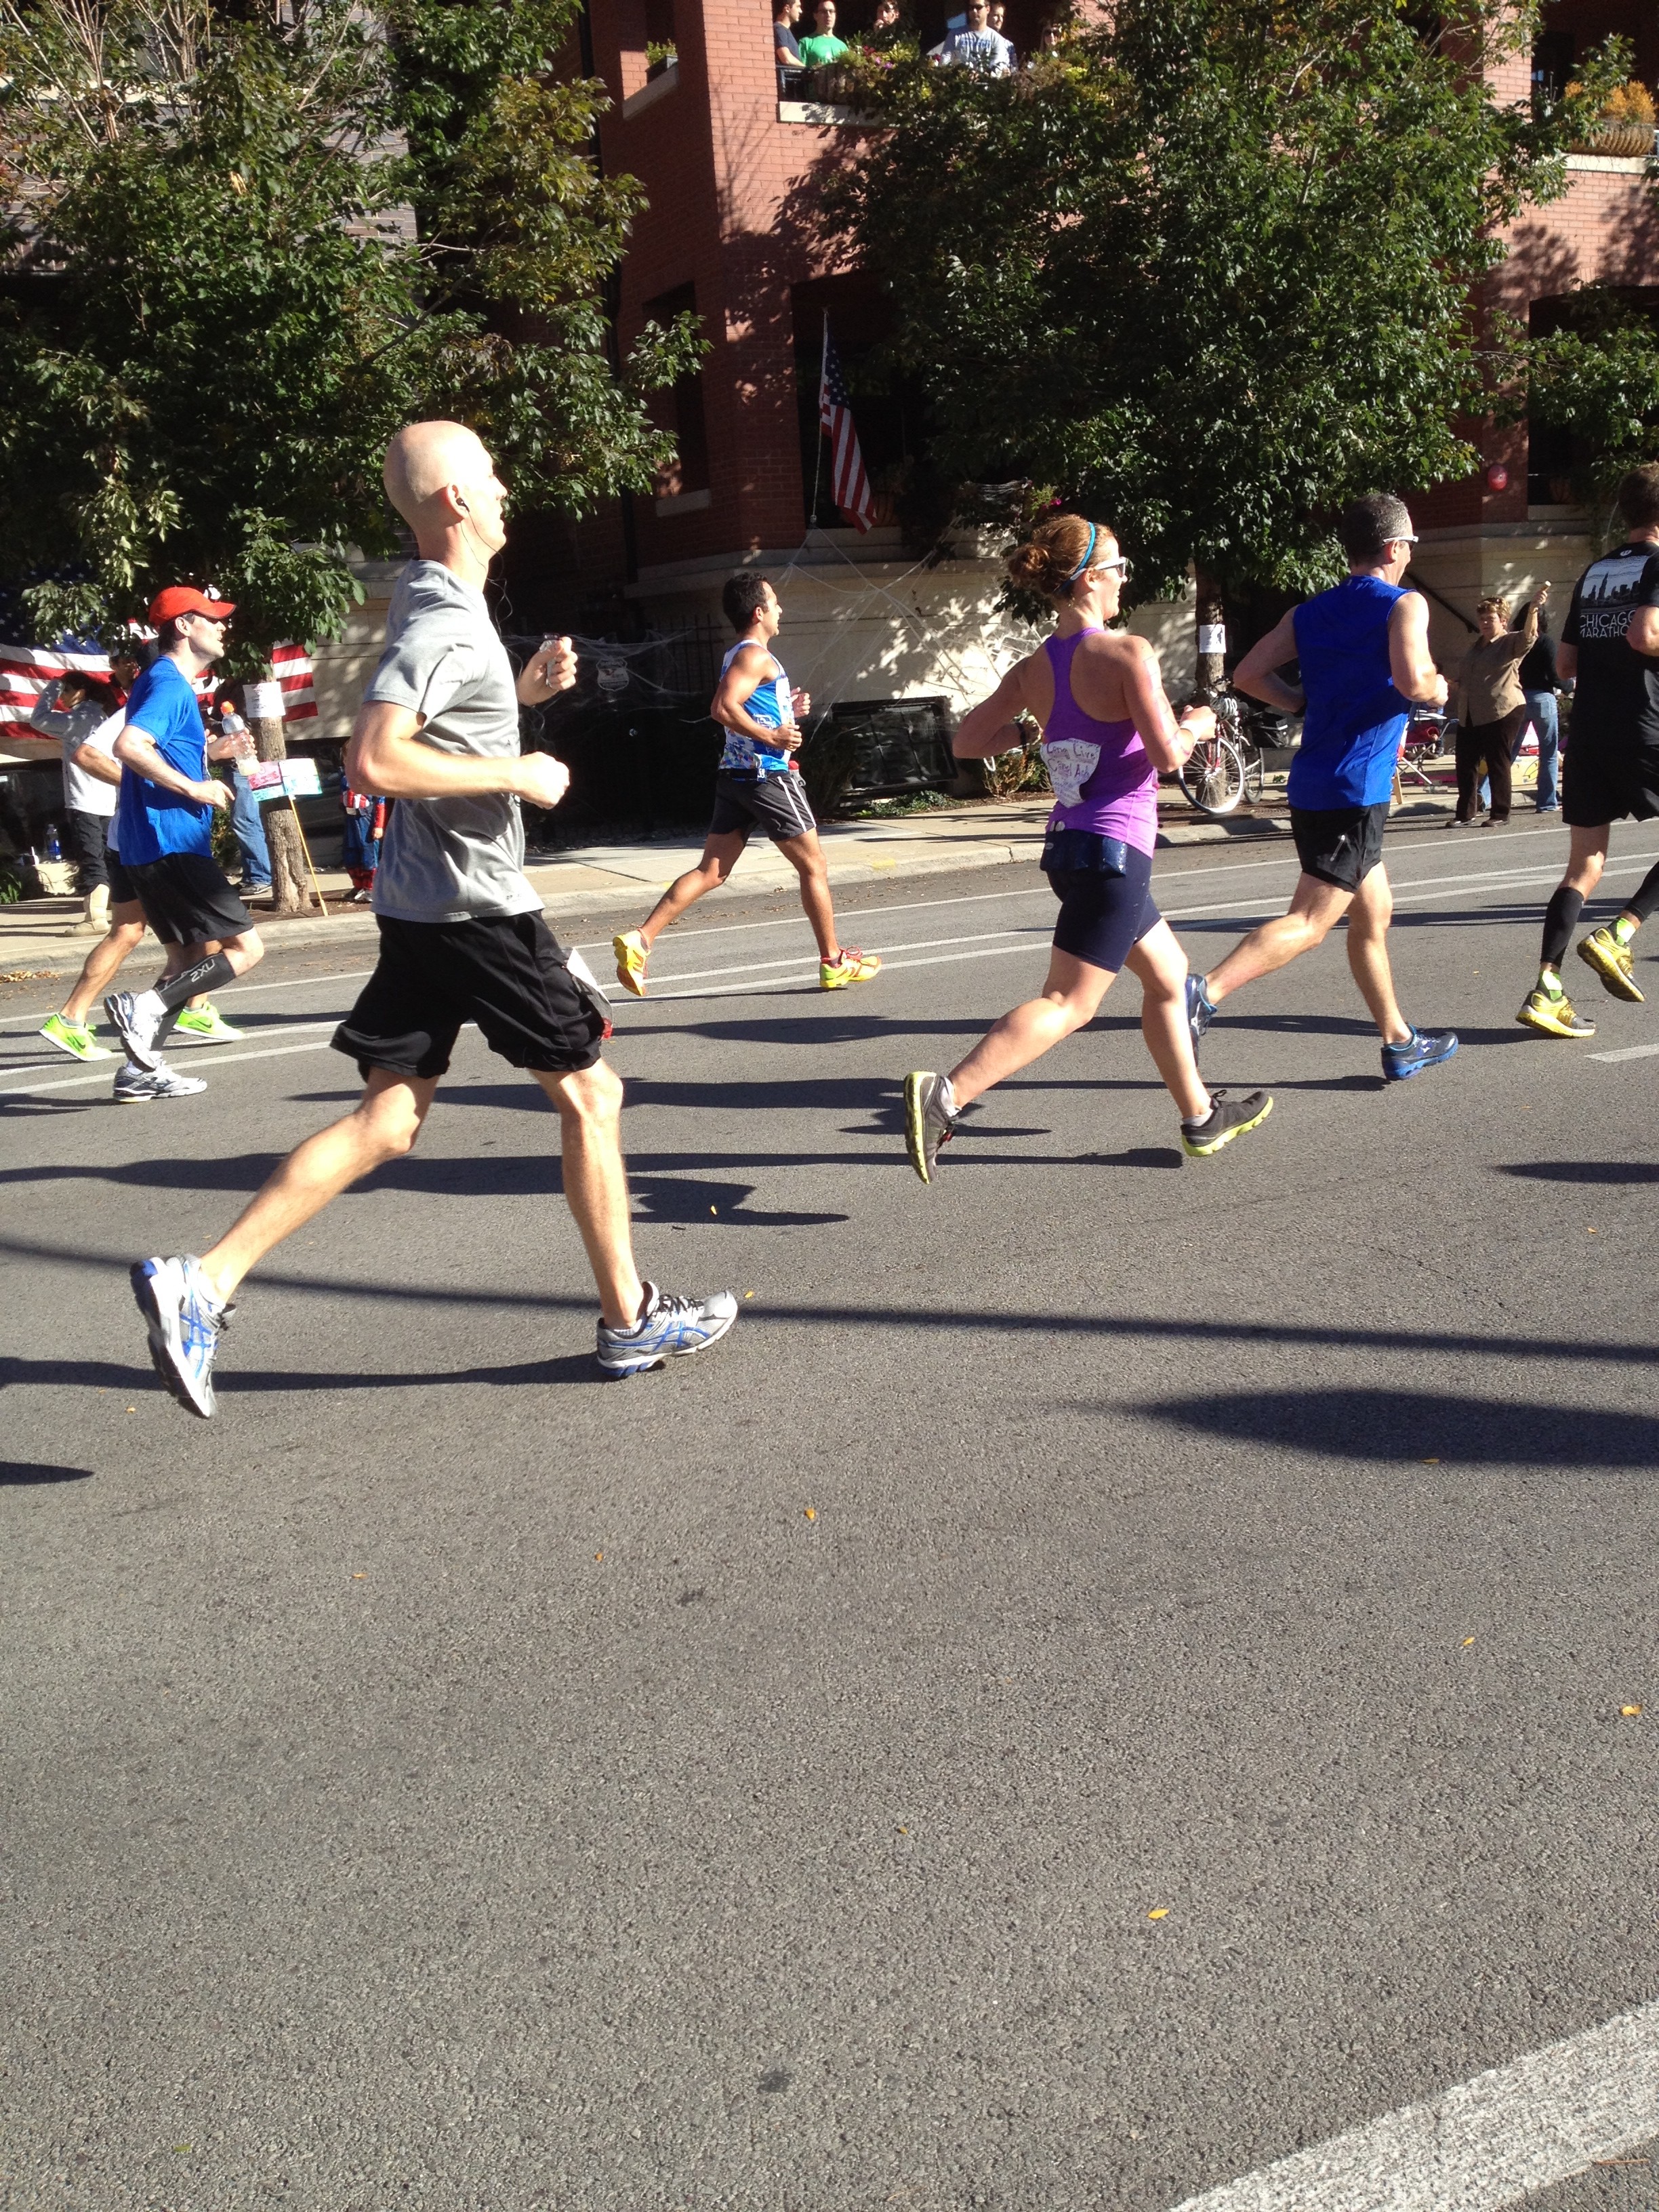 from Chicago '13, circa mile 16. This marathon PR is going to fall... and hard.